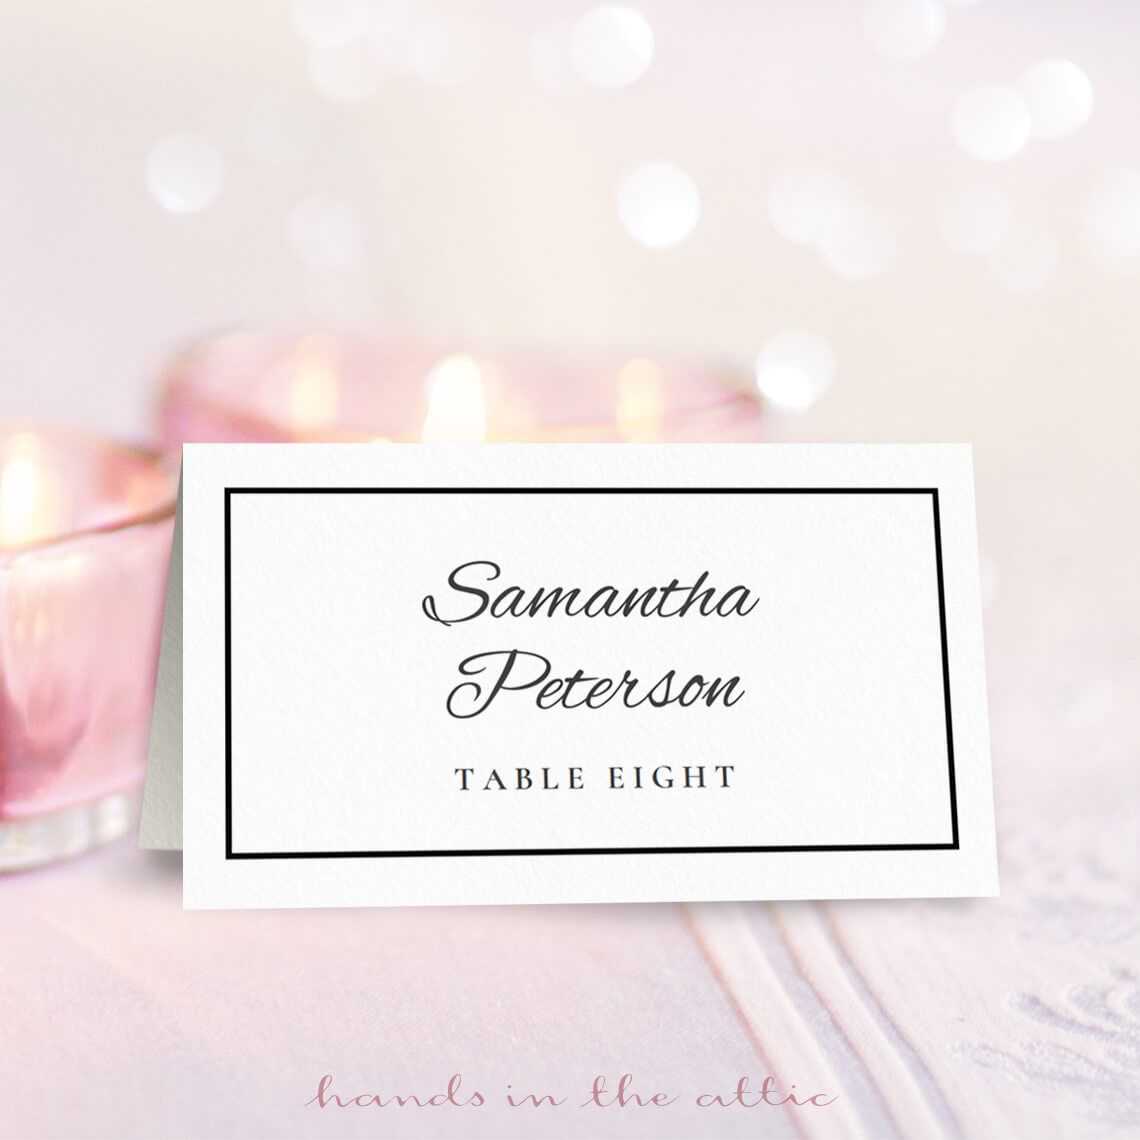 8 Free Wedding Place Card Templates Intended For Table Reservation Card Template